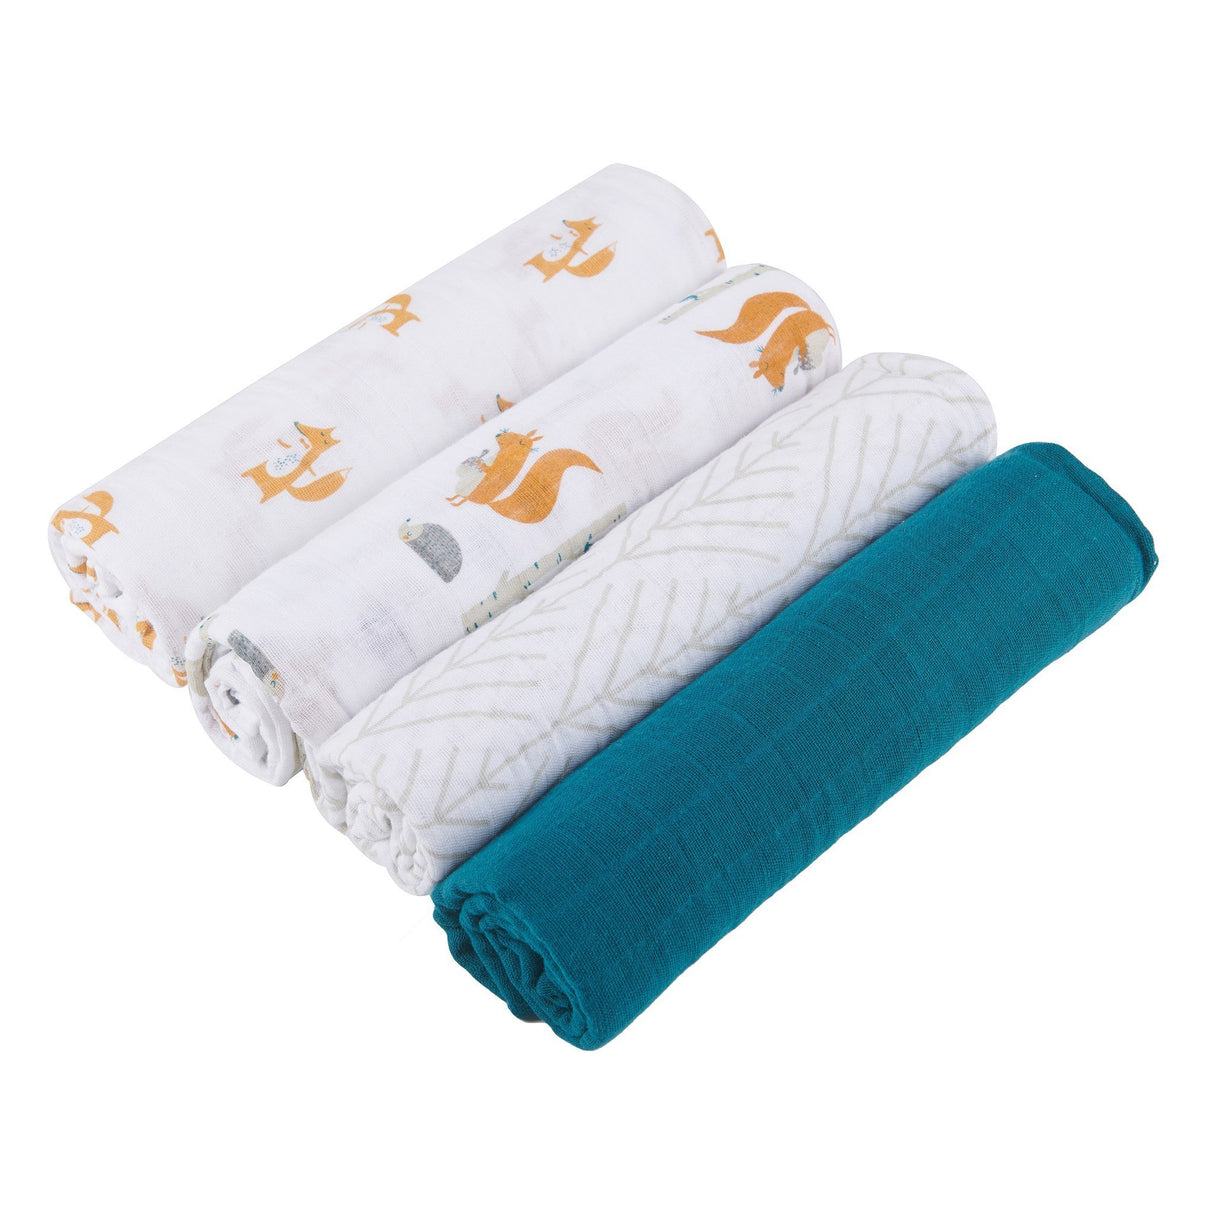 Forest Friends Swaddle Blankets 4 Pack - Aiden's Corner Baby & Toddler Clothes, Toys, Teethers, Feeding and Accesories